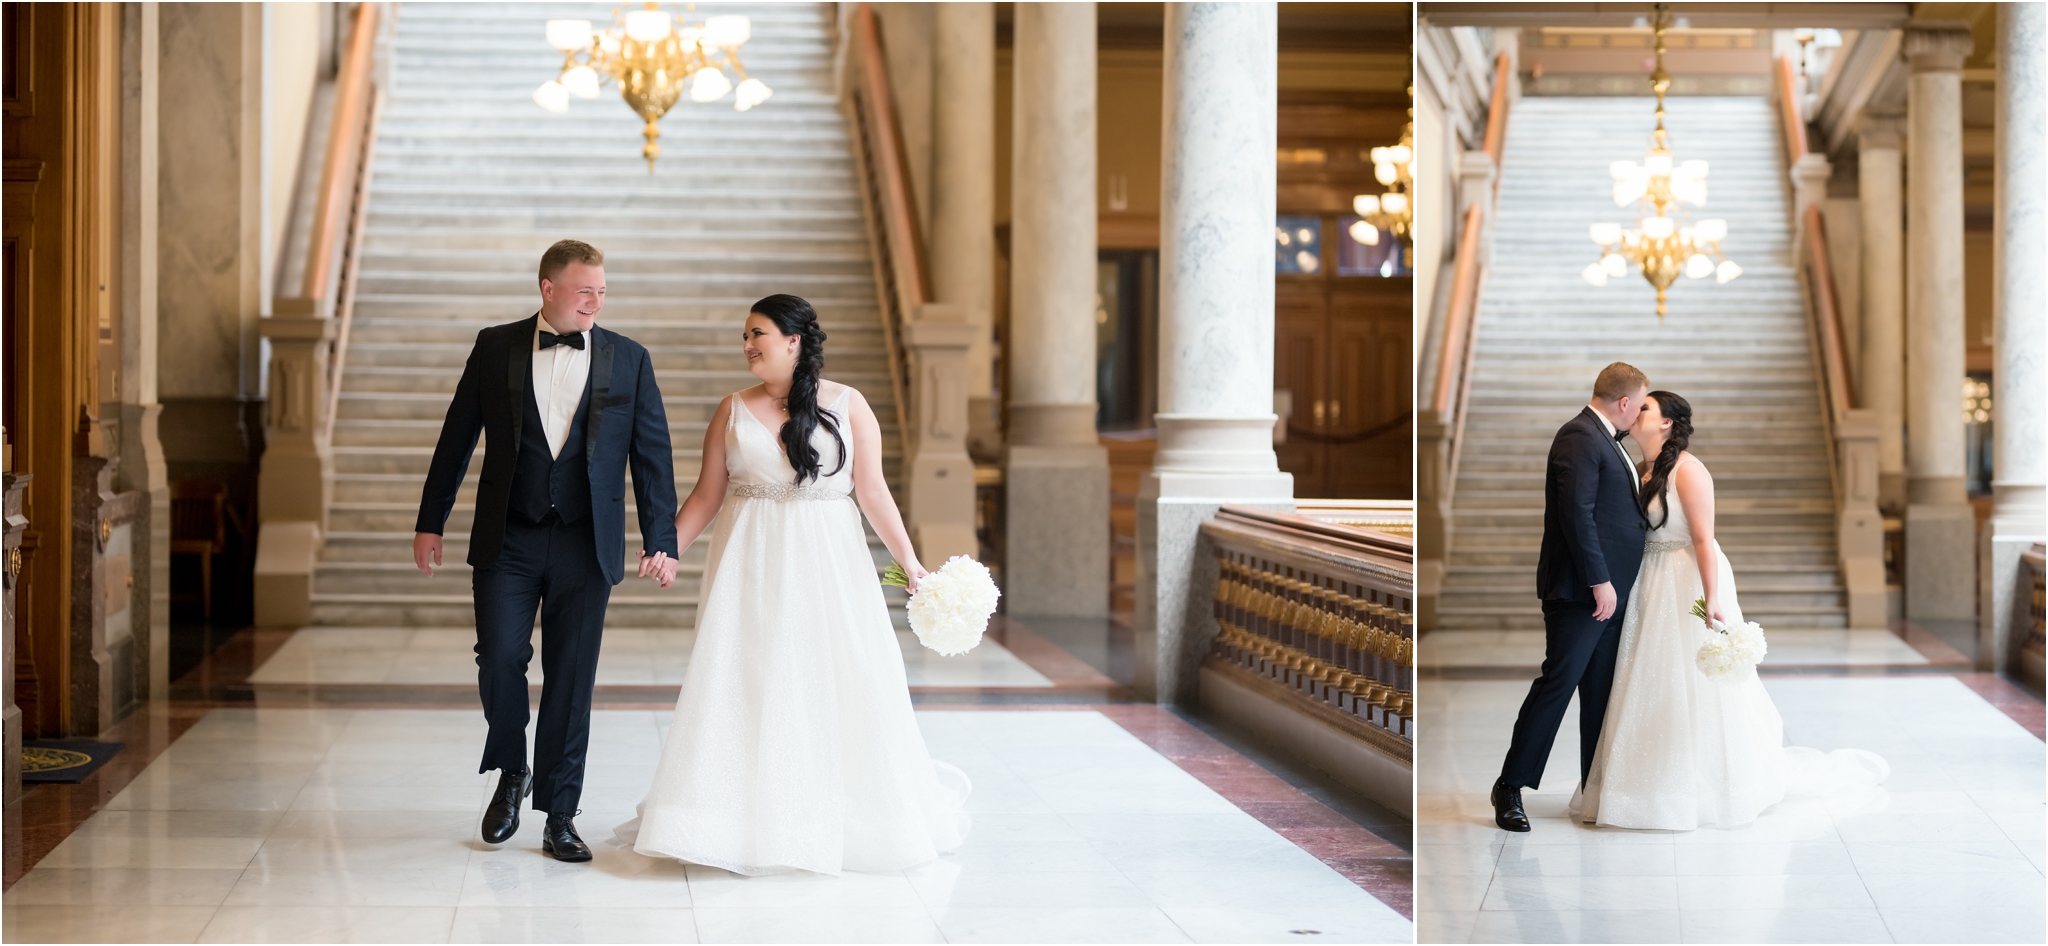 Indiana State House Ceremony | Sarah and Rachel Wedding Photographers | Indianapolis, IN | Incredible classic Bridal Portraits